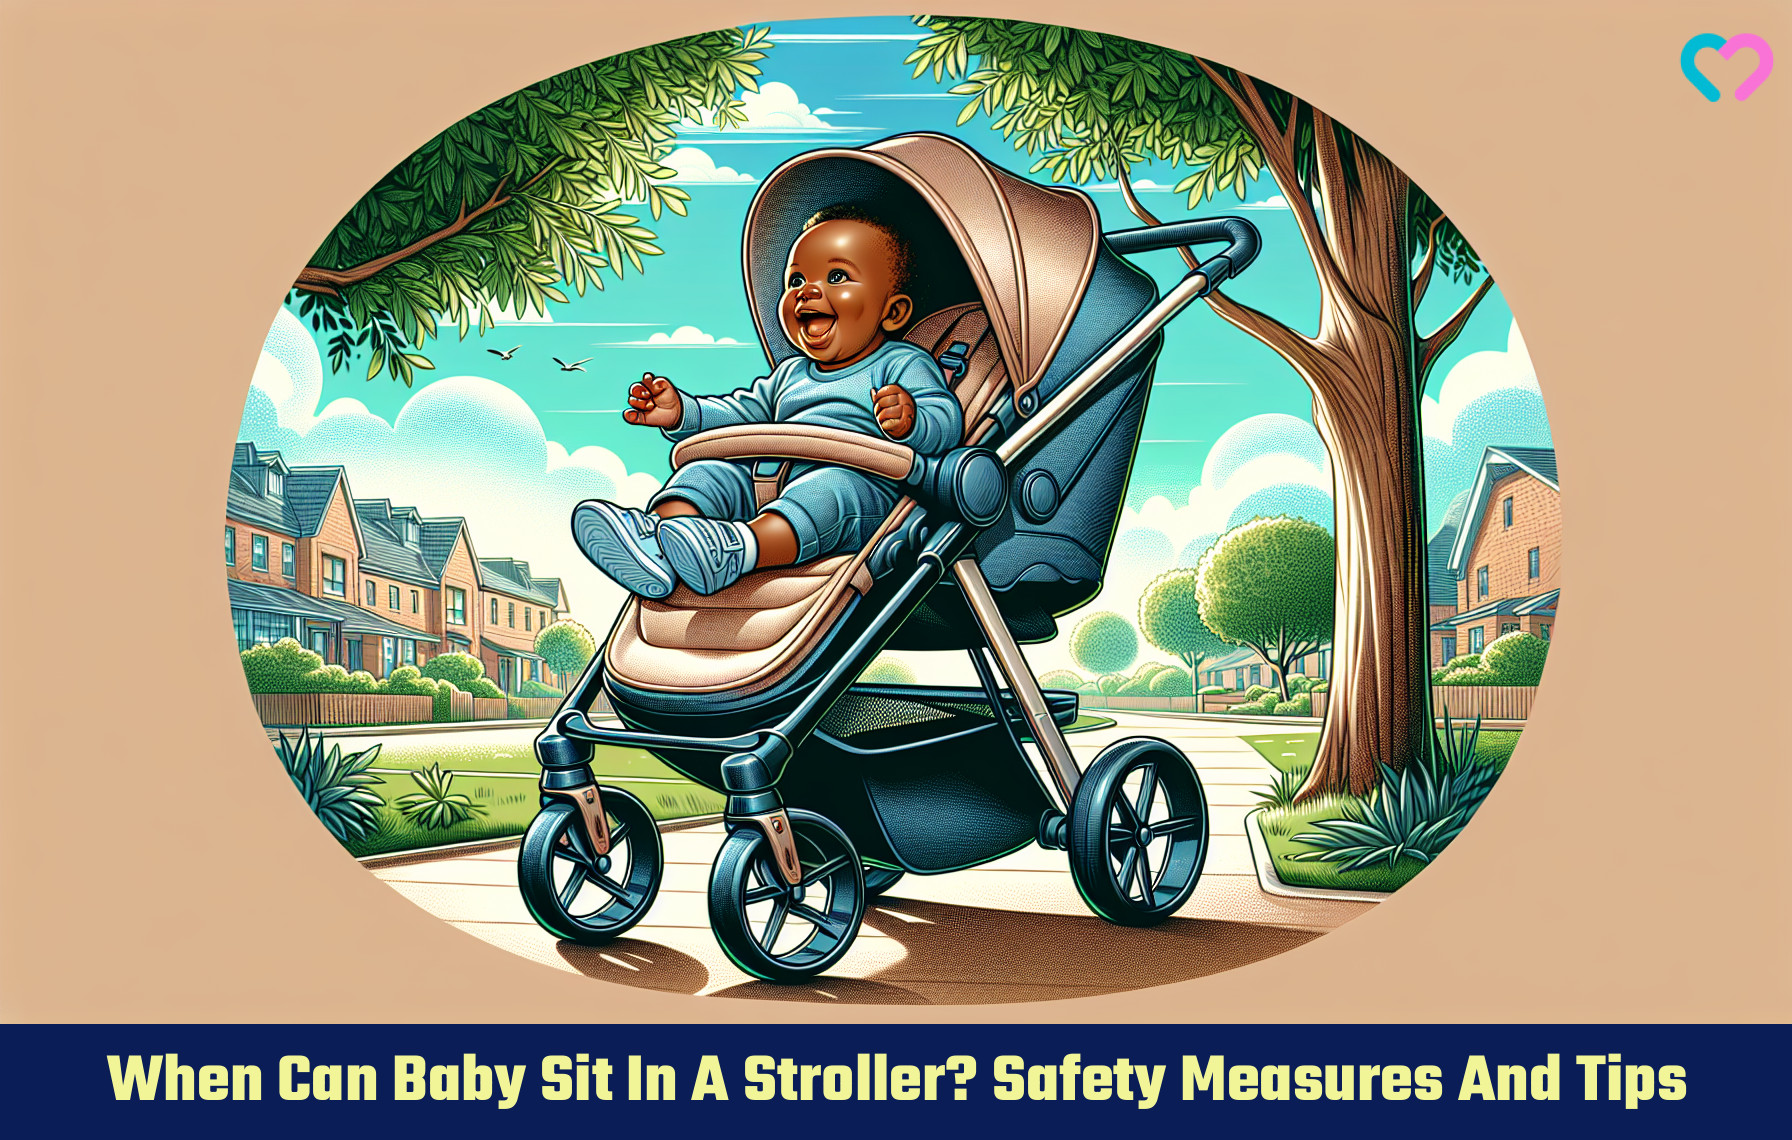 When Can A Baby Sit In A Stroller_illustration